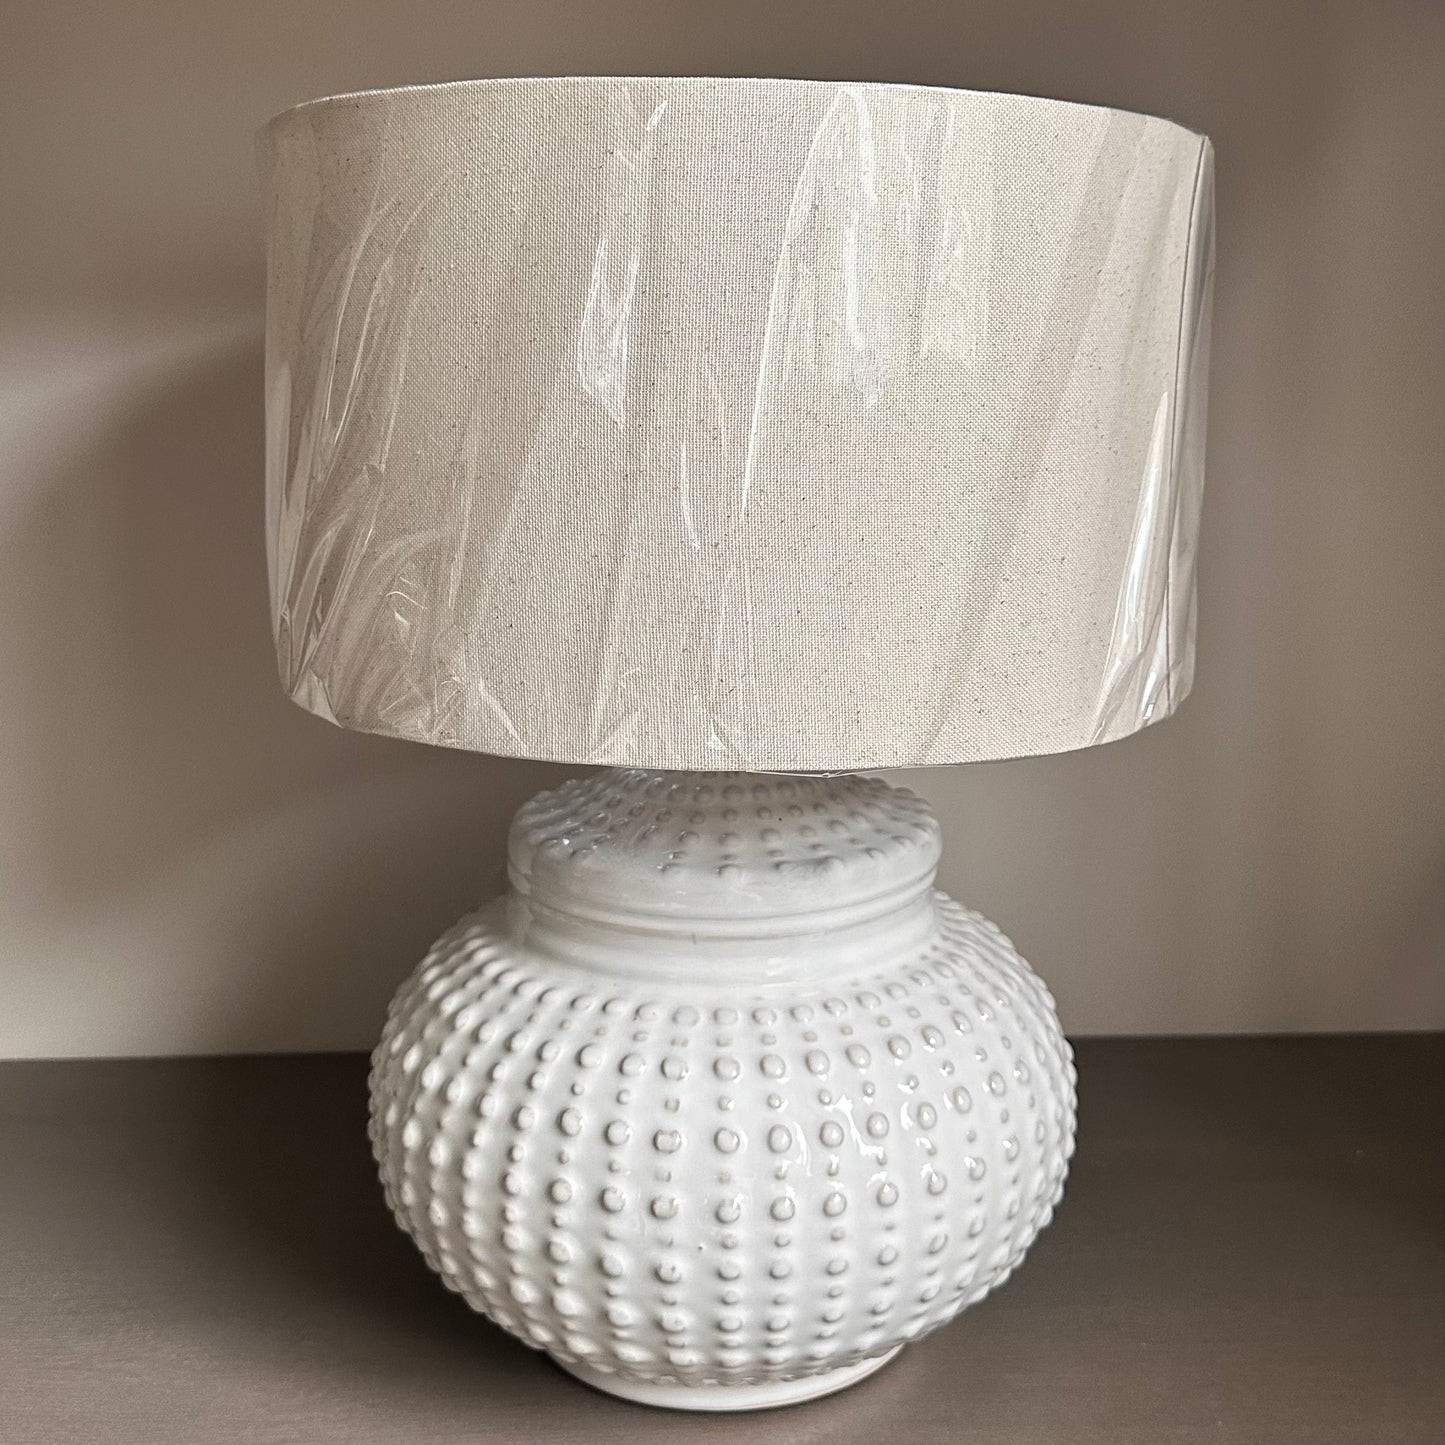 Dimple Lamp With Linen Shade